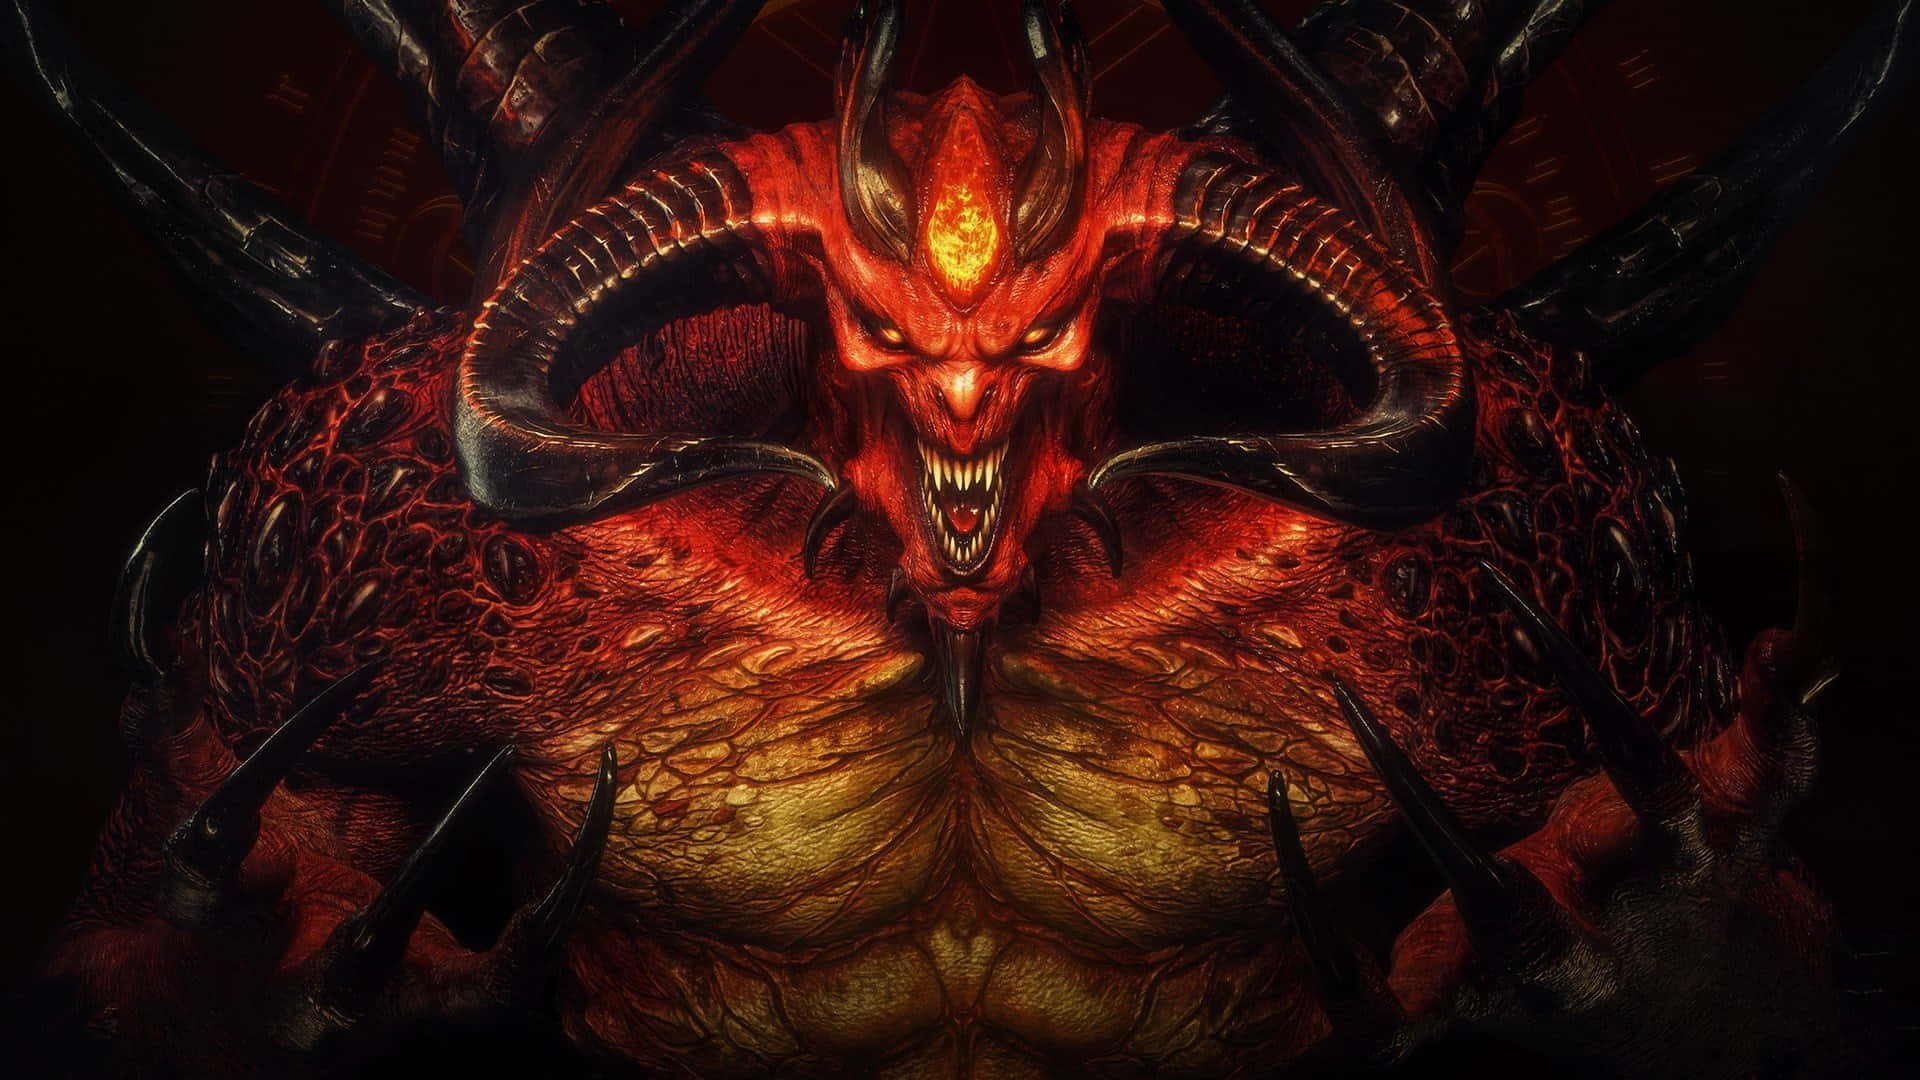 – “Harness the power of the Lord of Terror in Diablo 2 Resurrected” Wallpaper